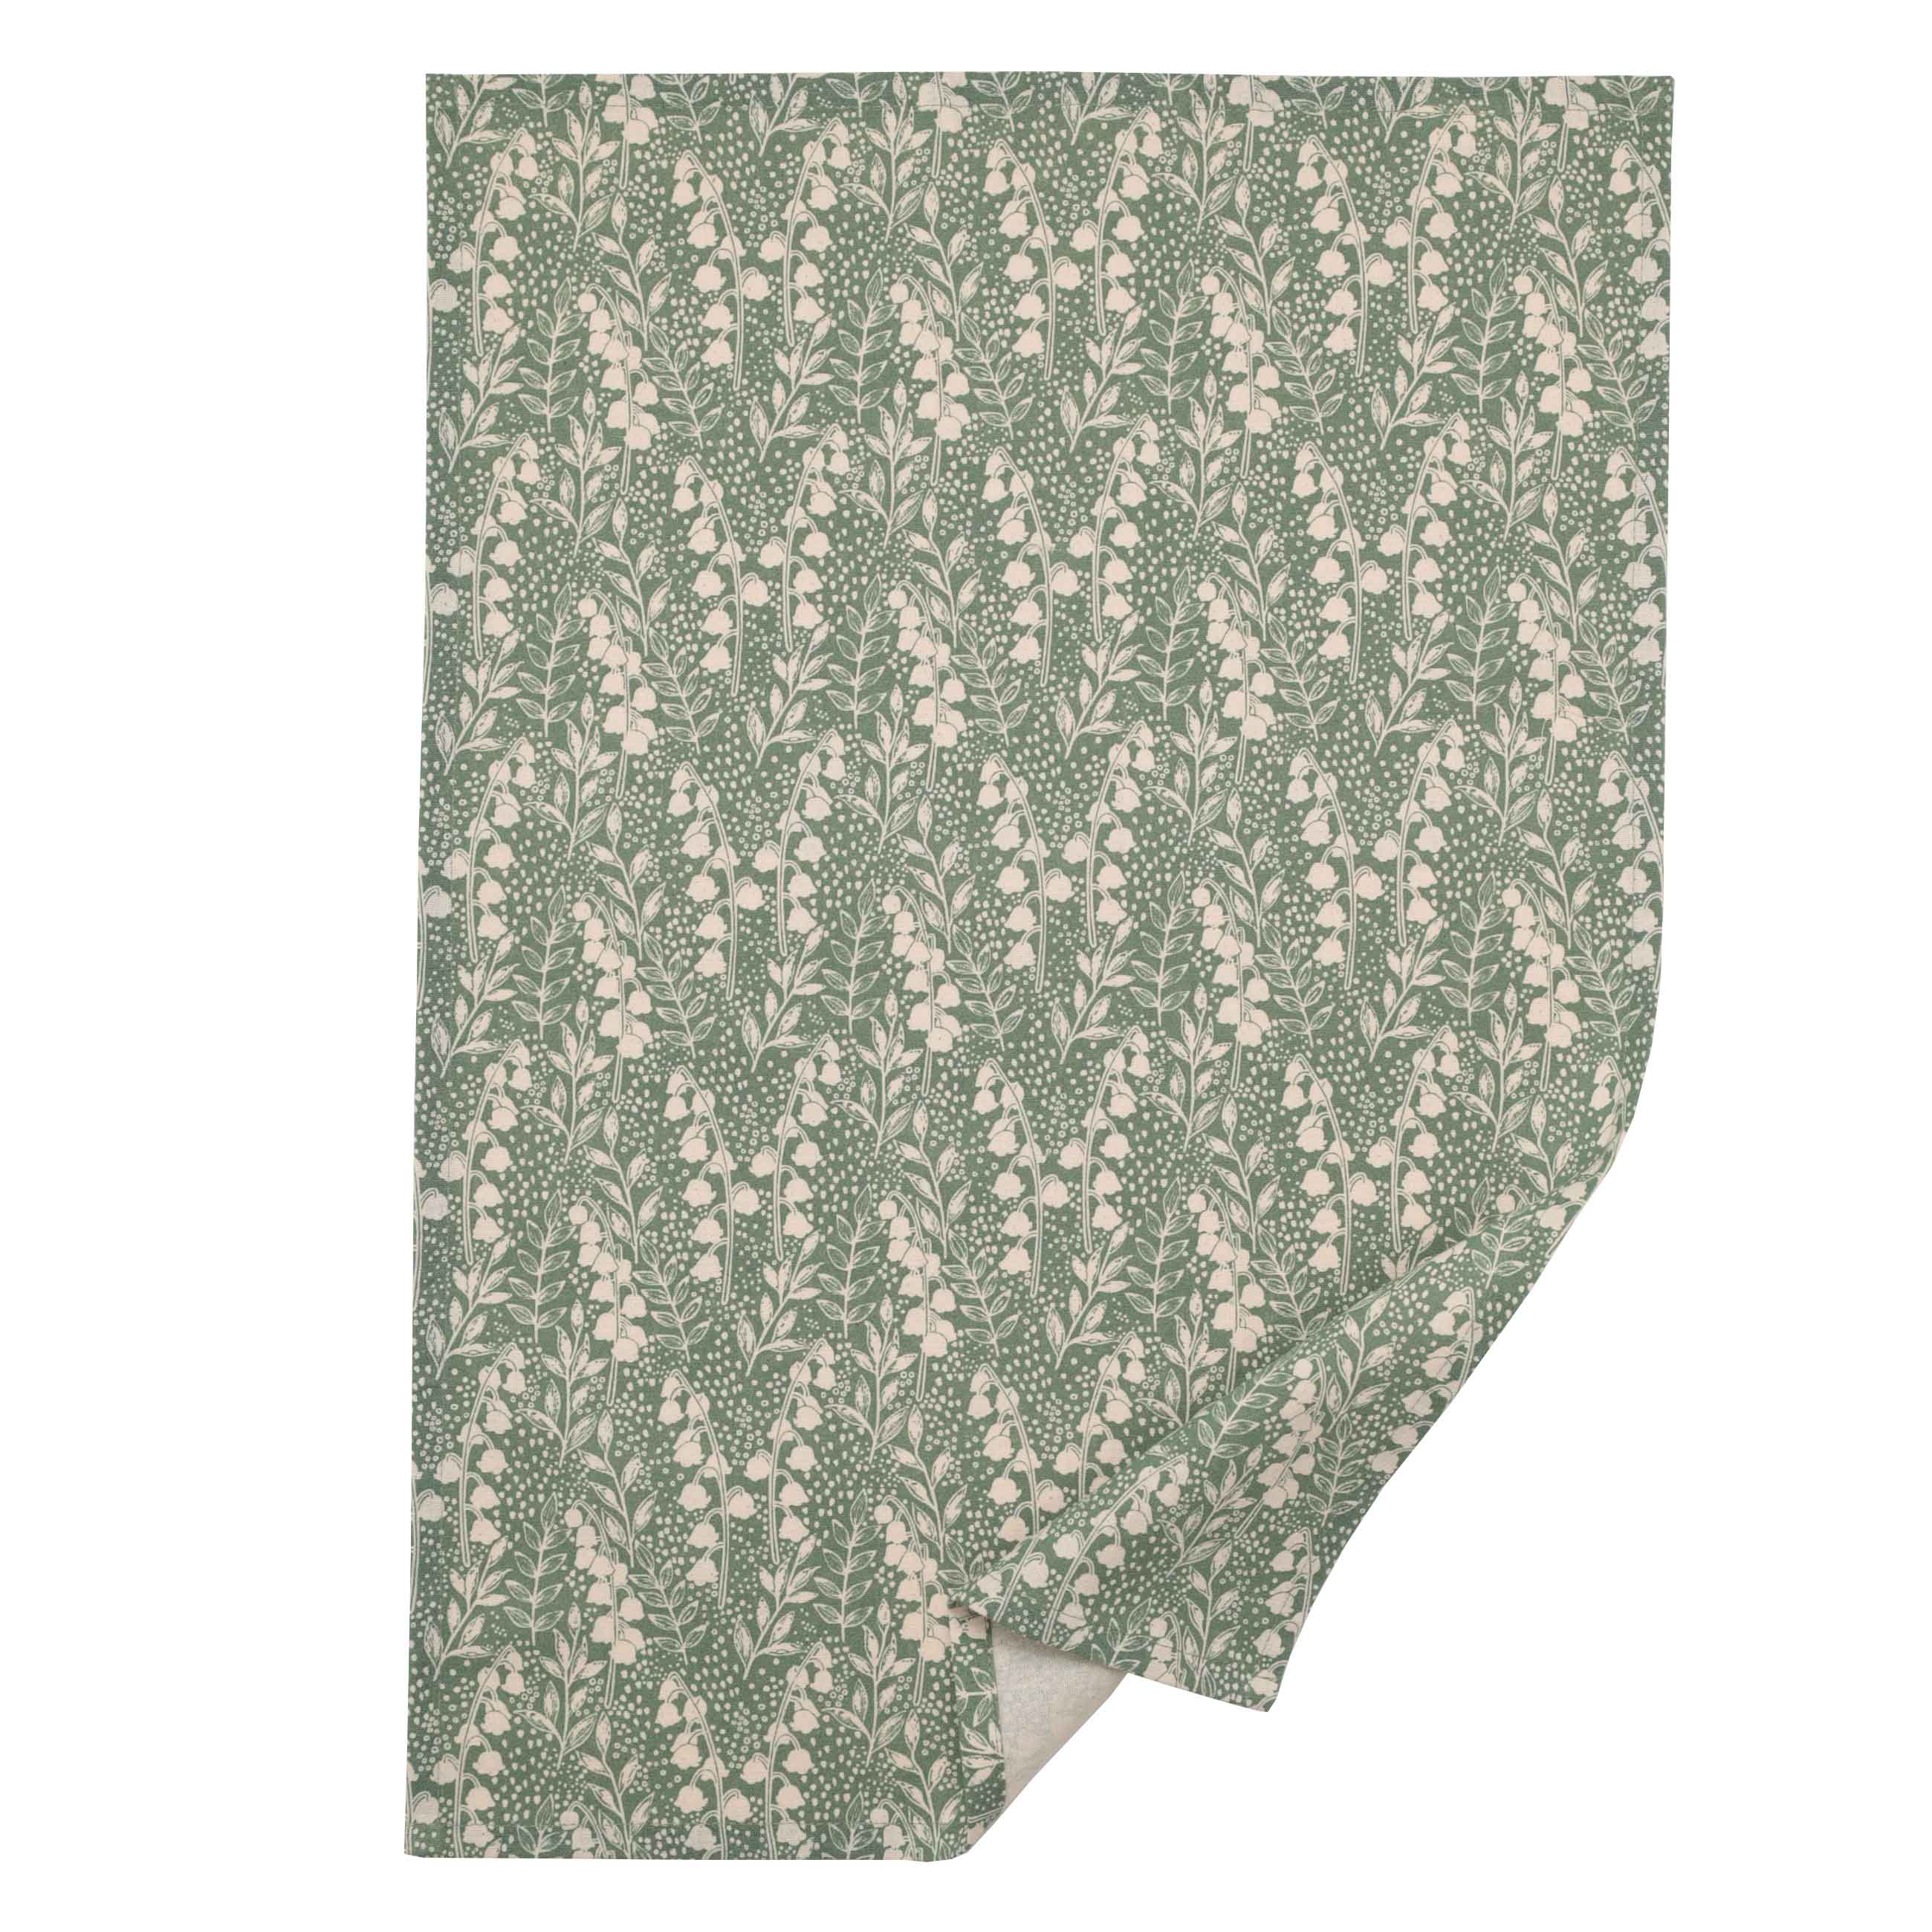 Kitchen towel, 40x60 cm, cotton, green, Lily of the valley, May-lily изображение № 3